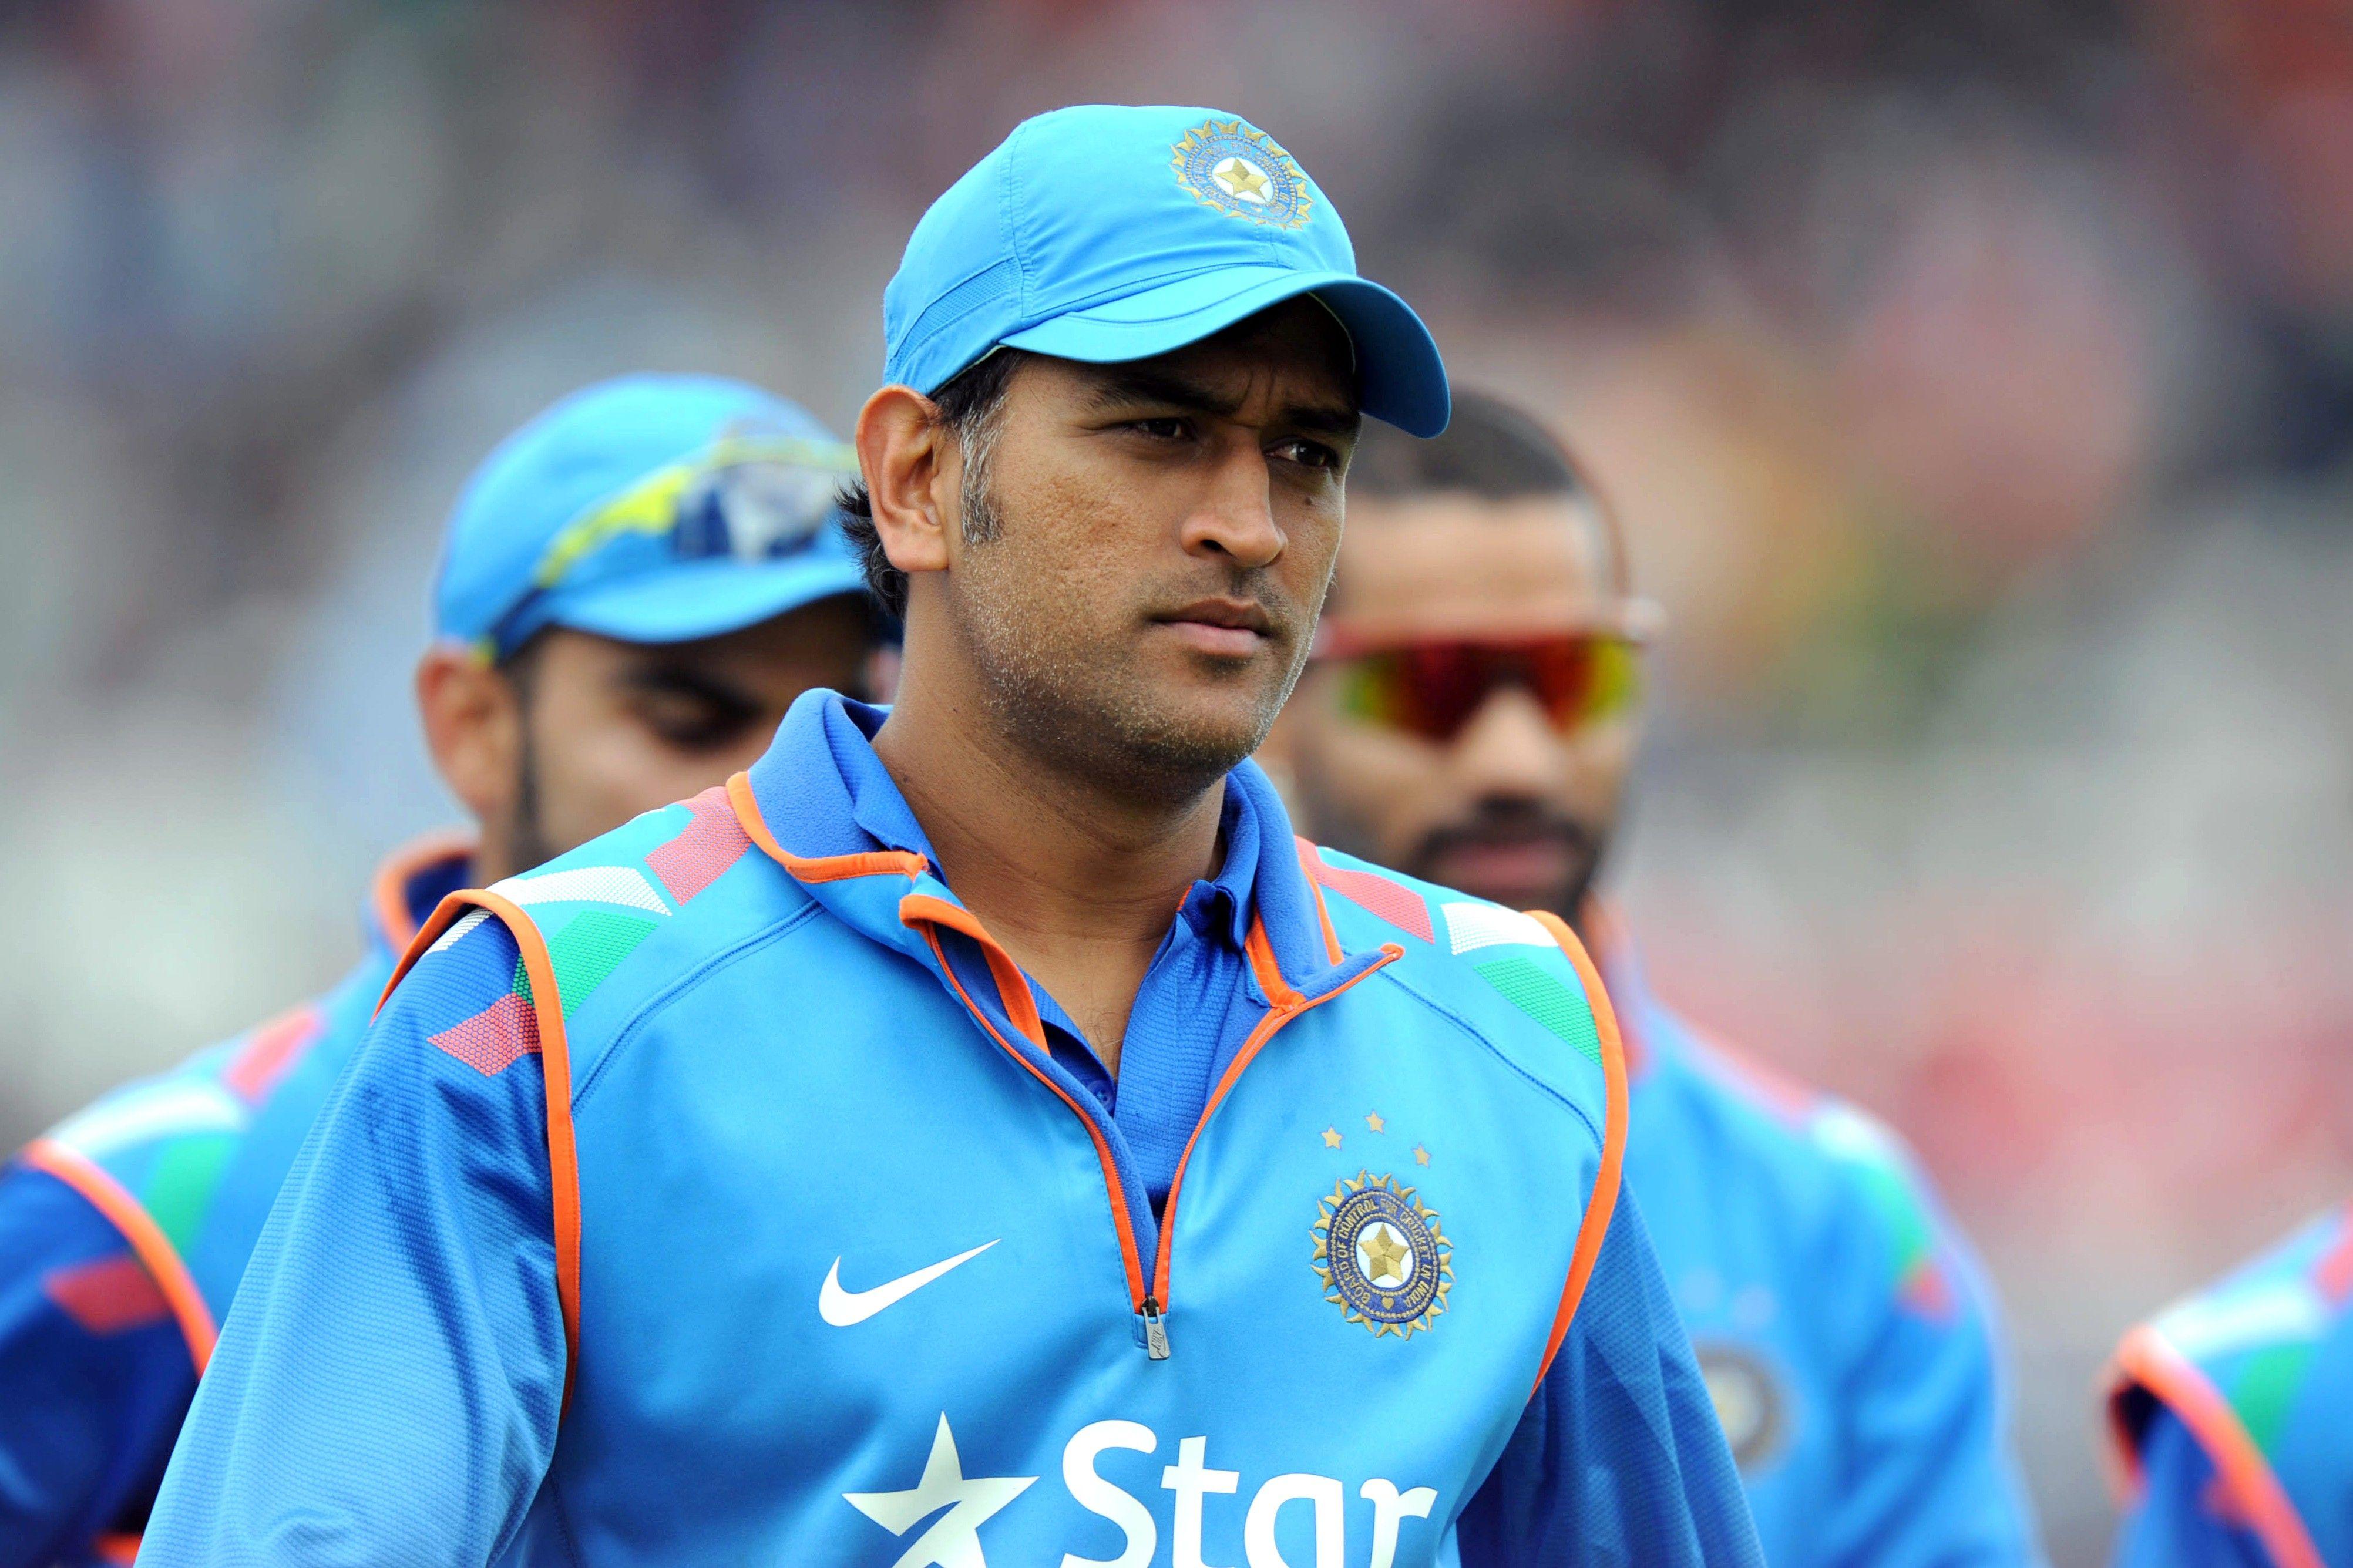 MS Dhoni HD Wallpapers Image Pictures Photos Download